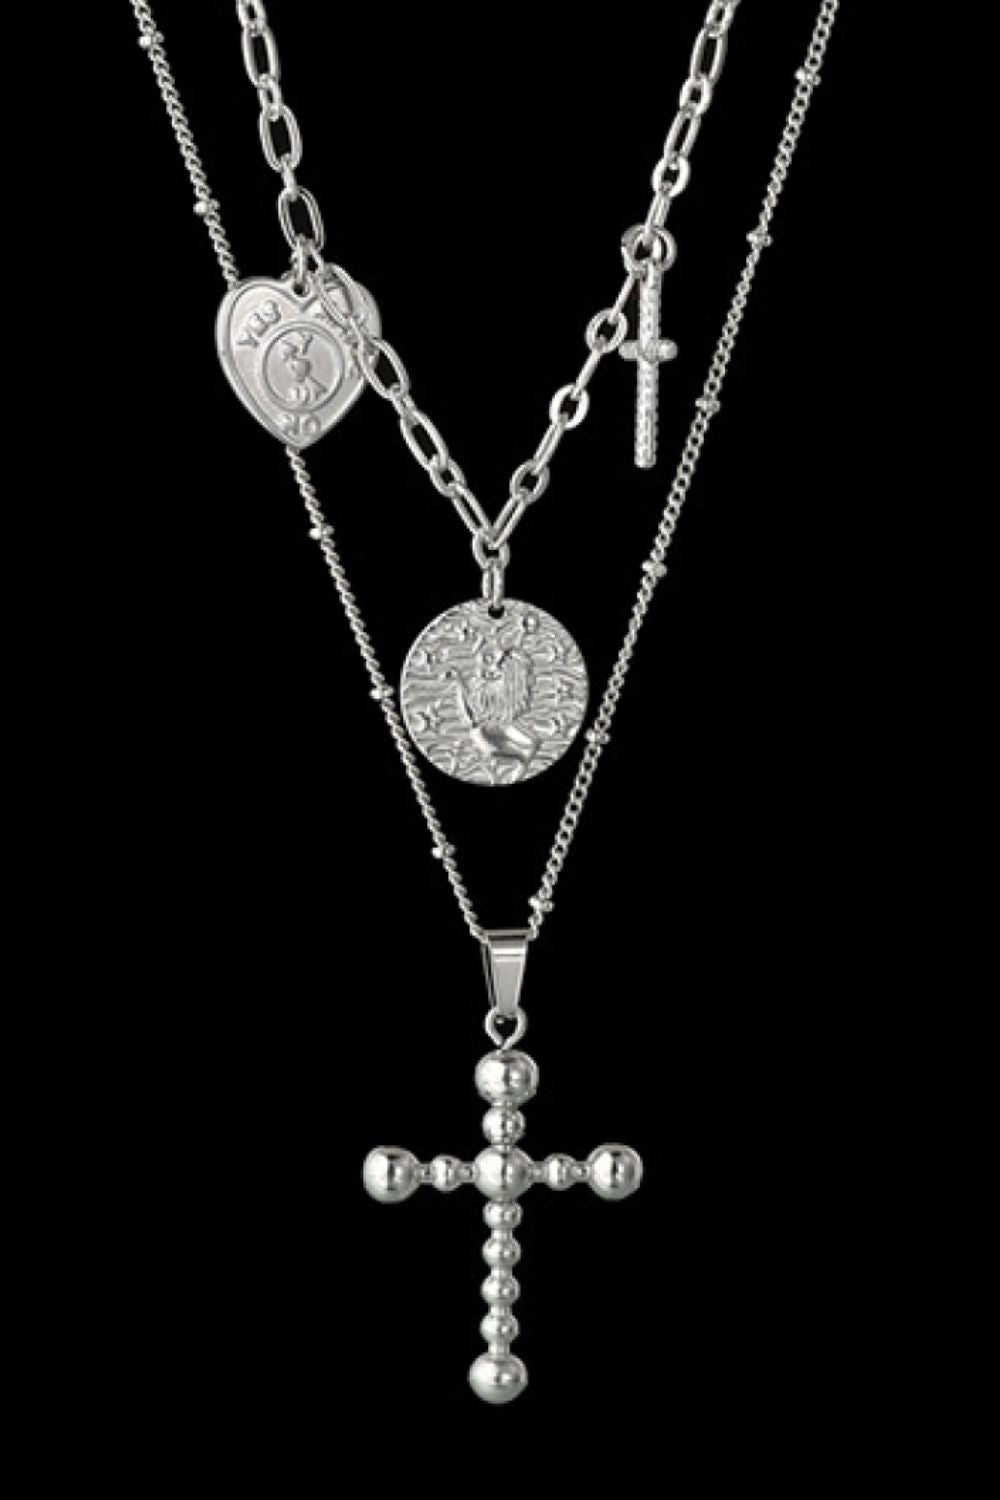 Stainless Steel Antique Coins & Cross Necklace - Guy Christopher 